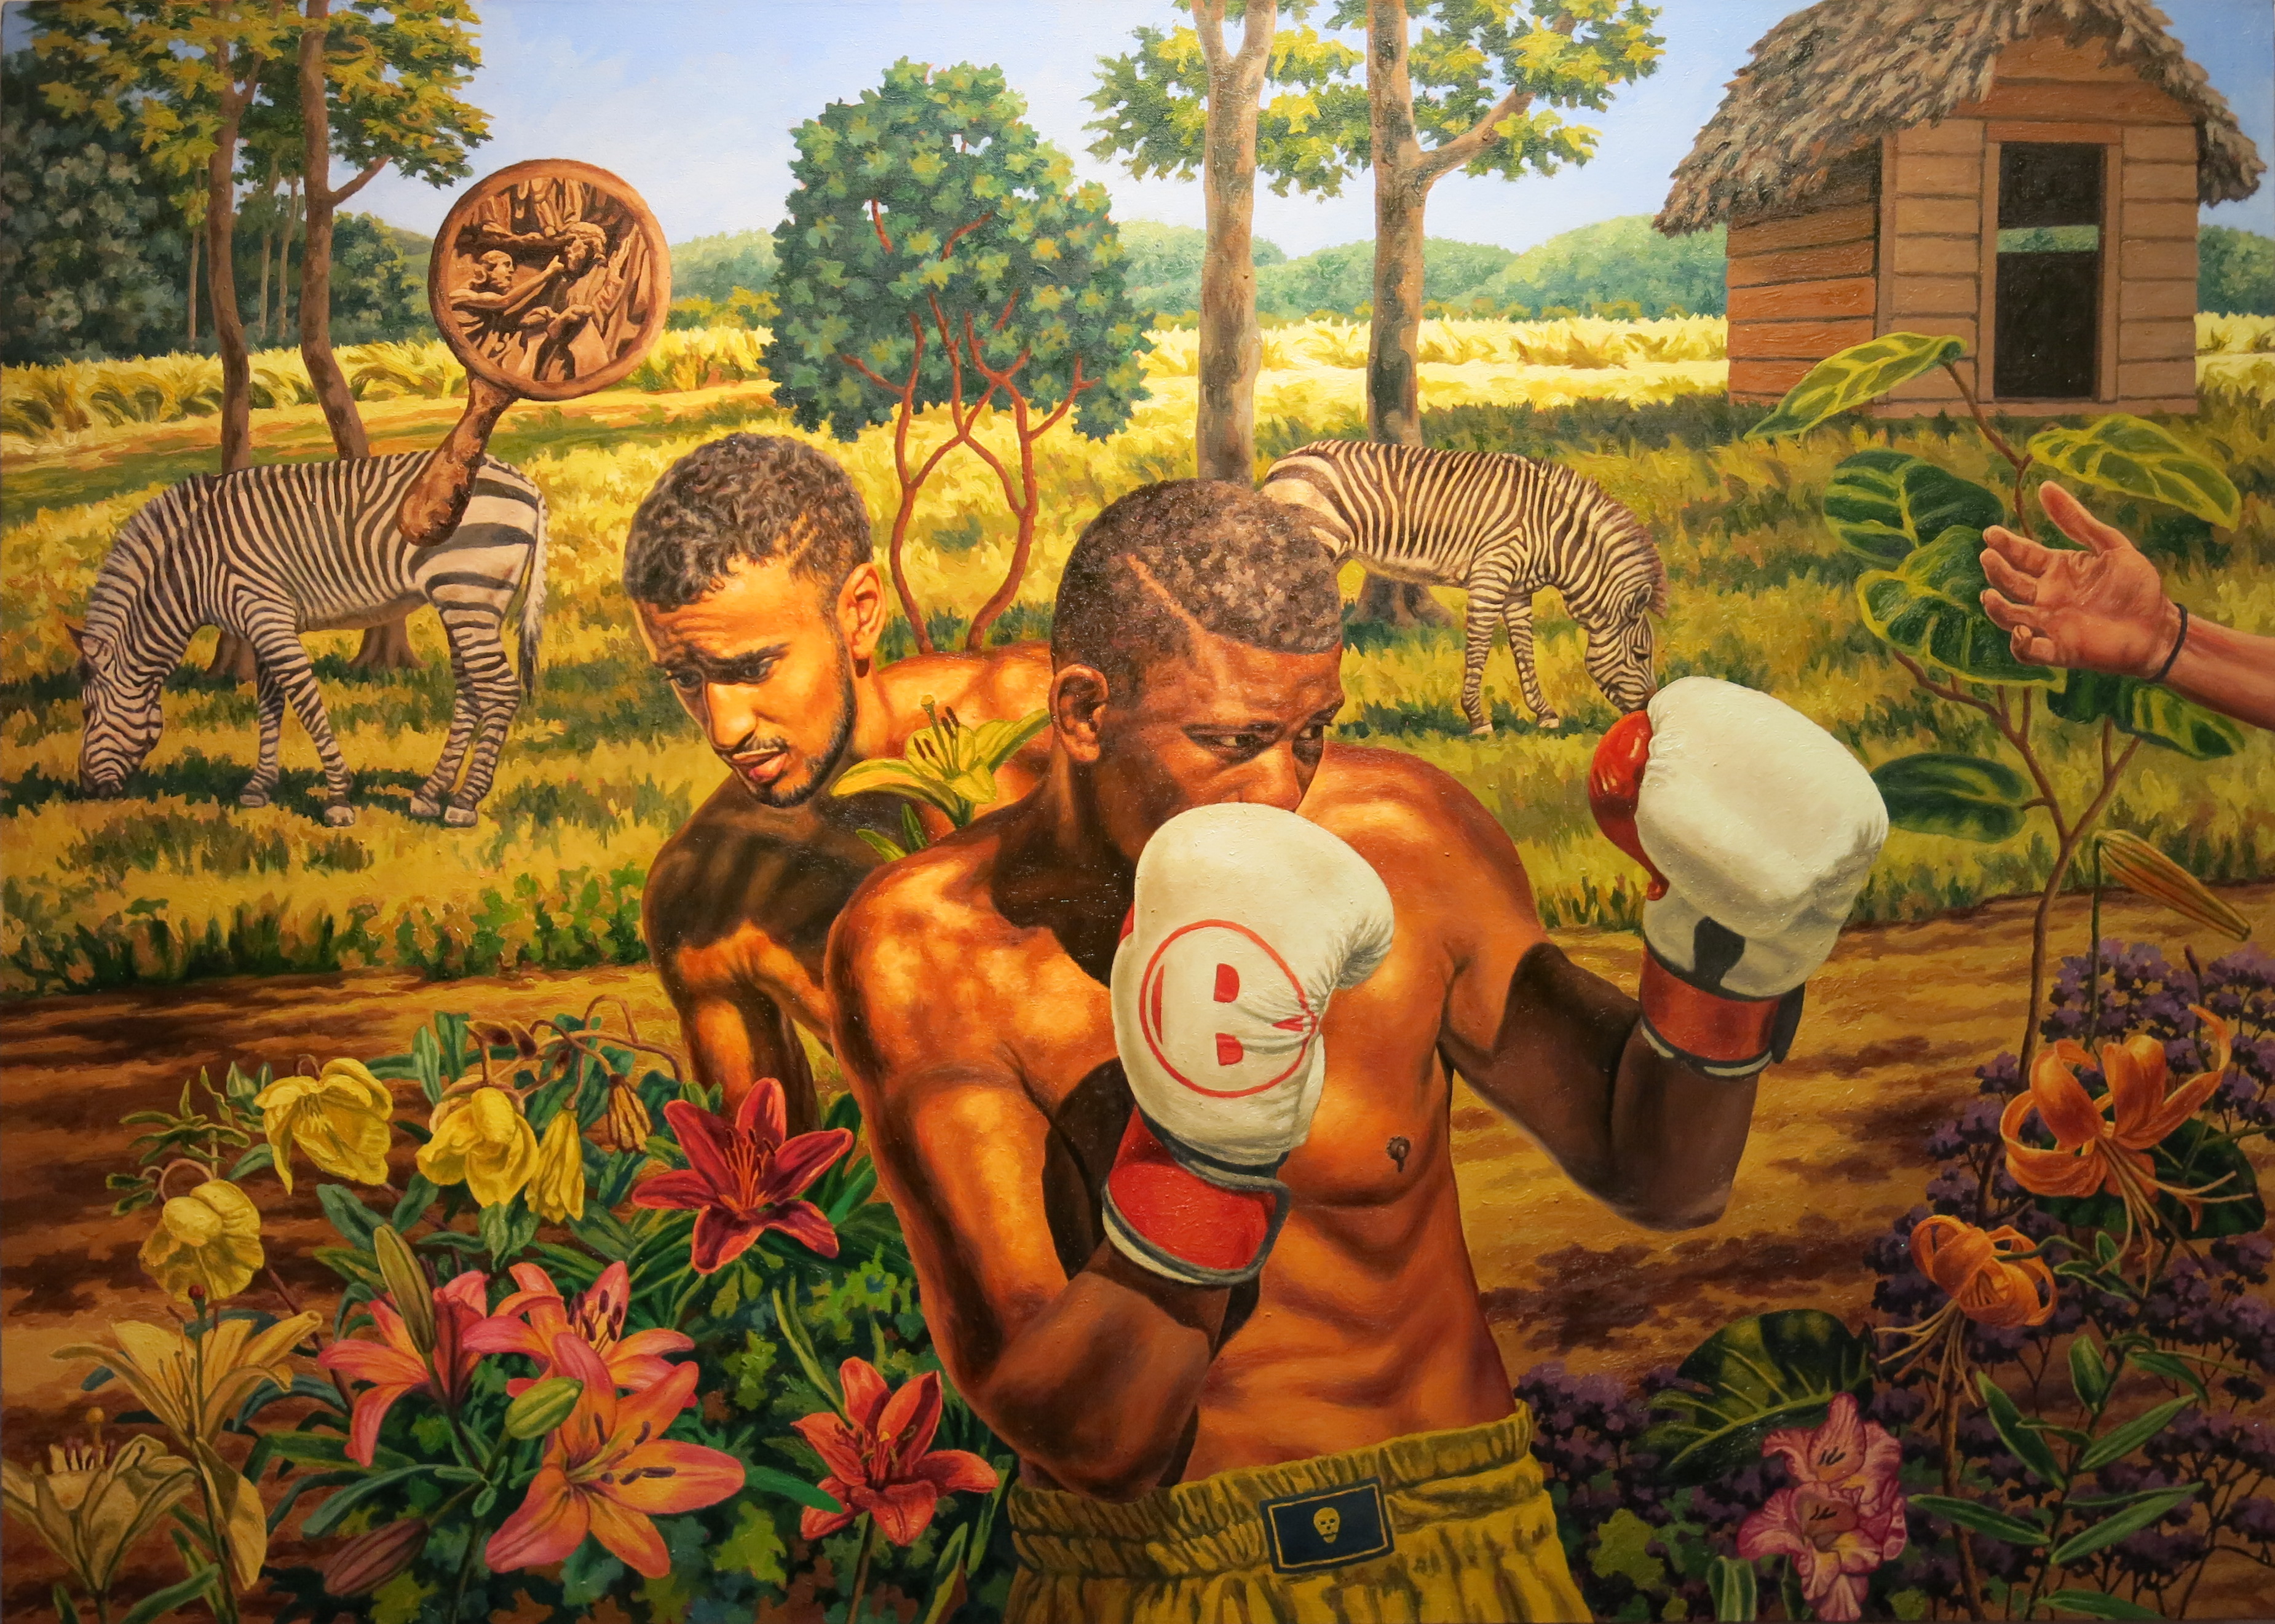 boxing figures in landscape of flowers, zebras and shed